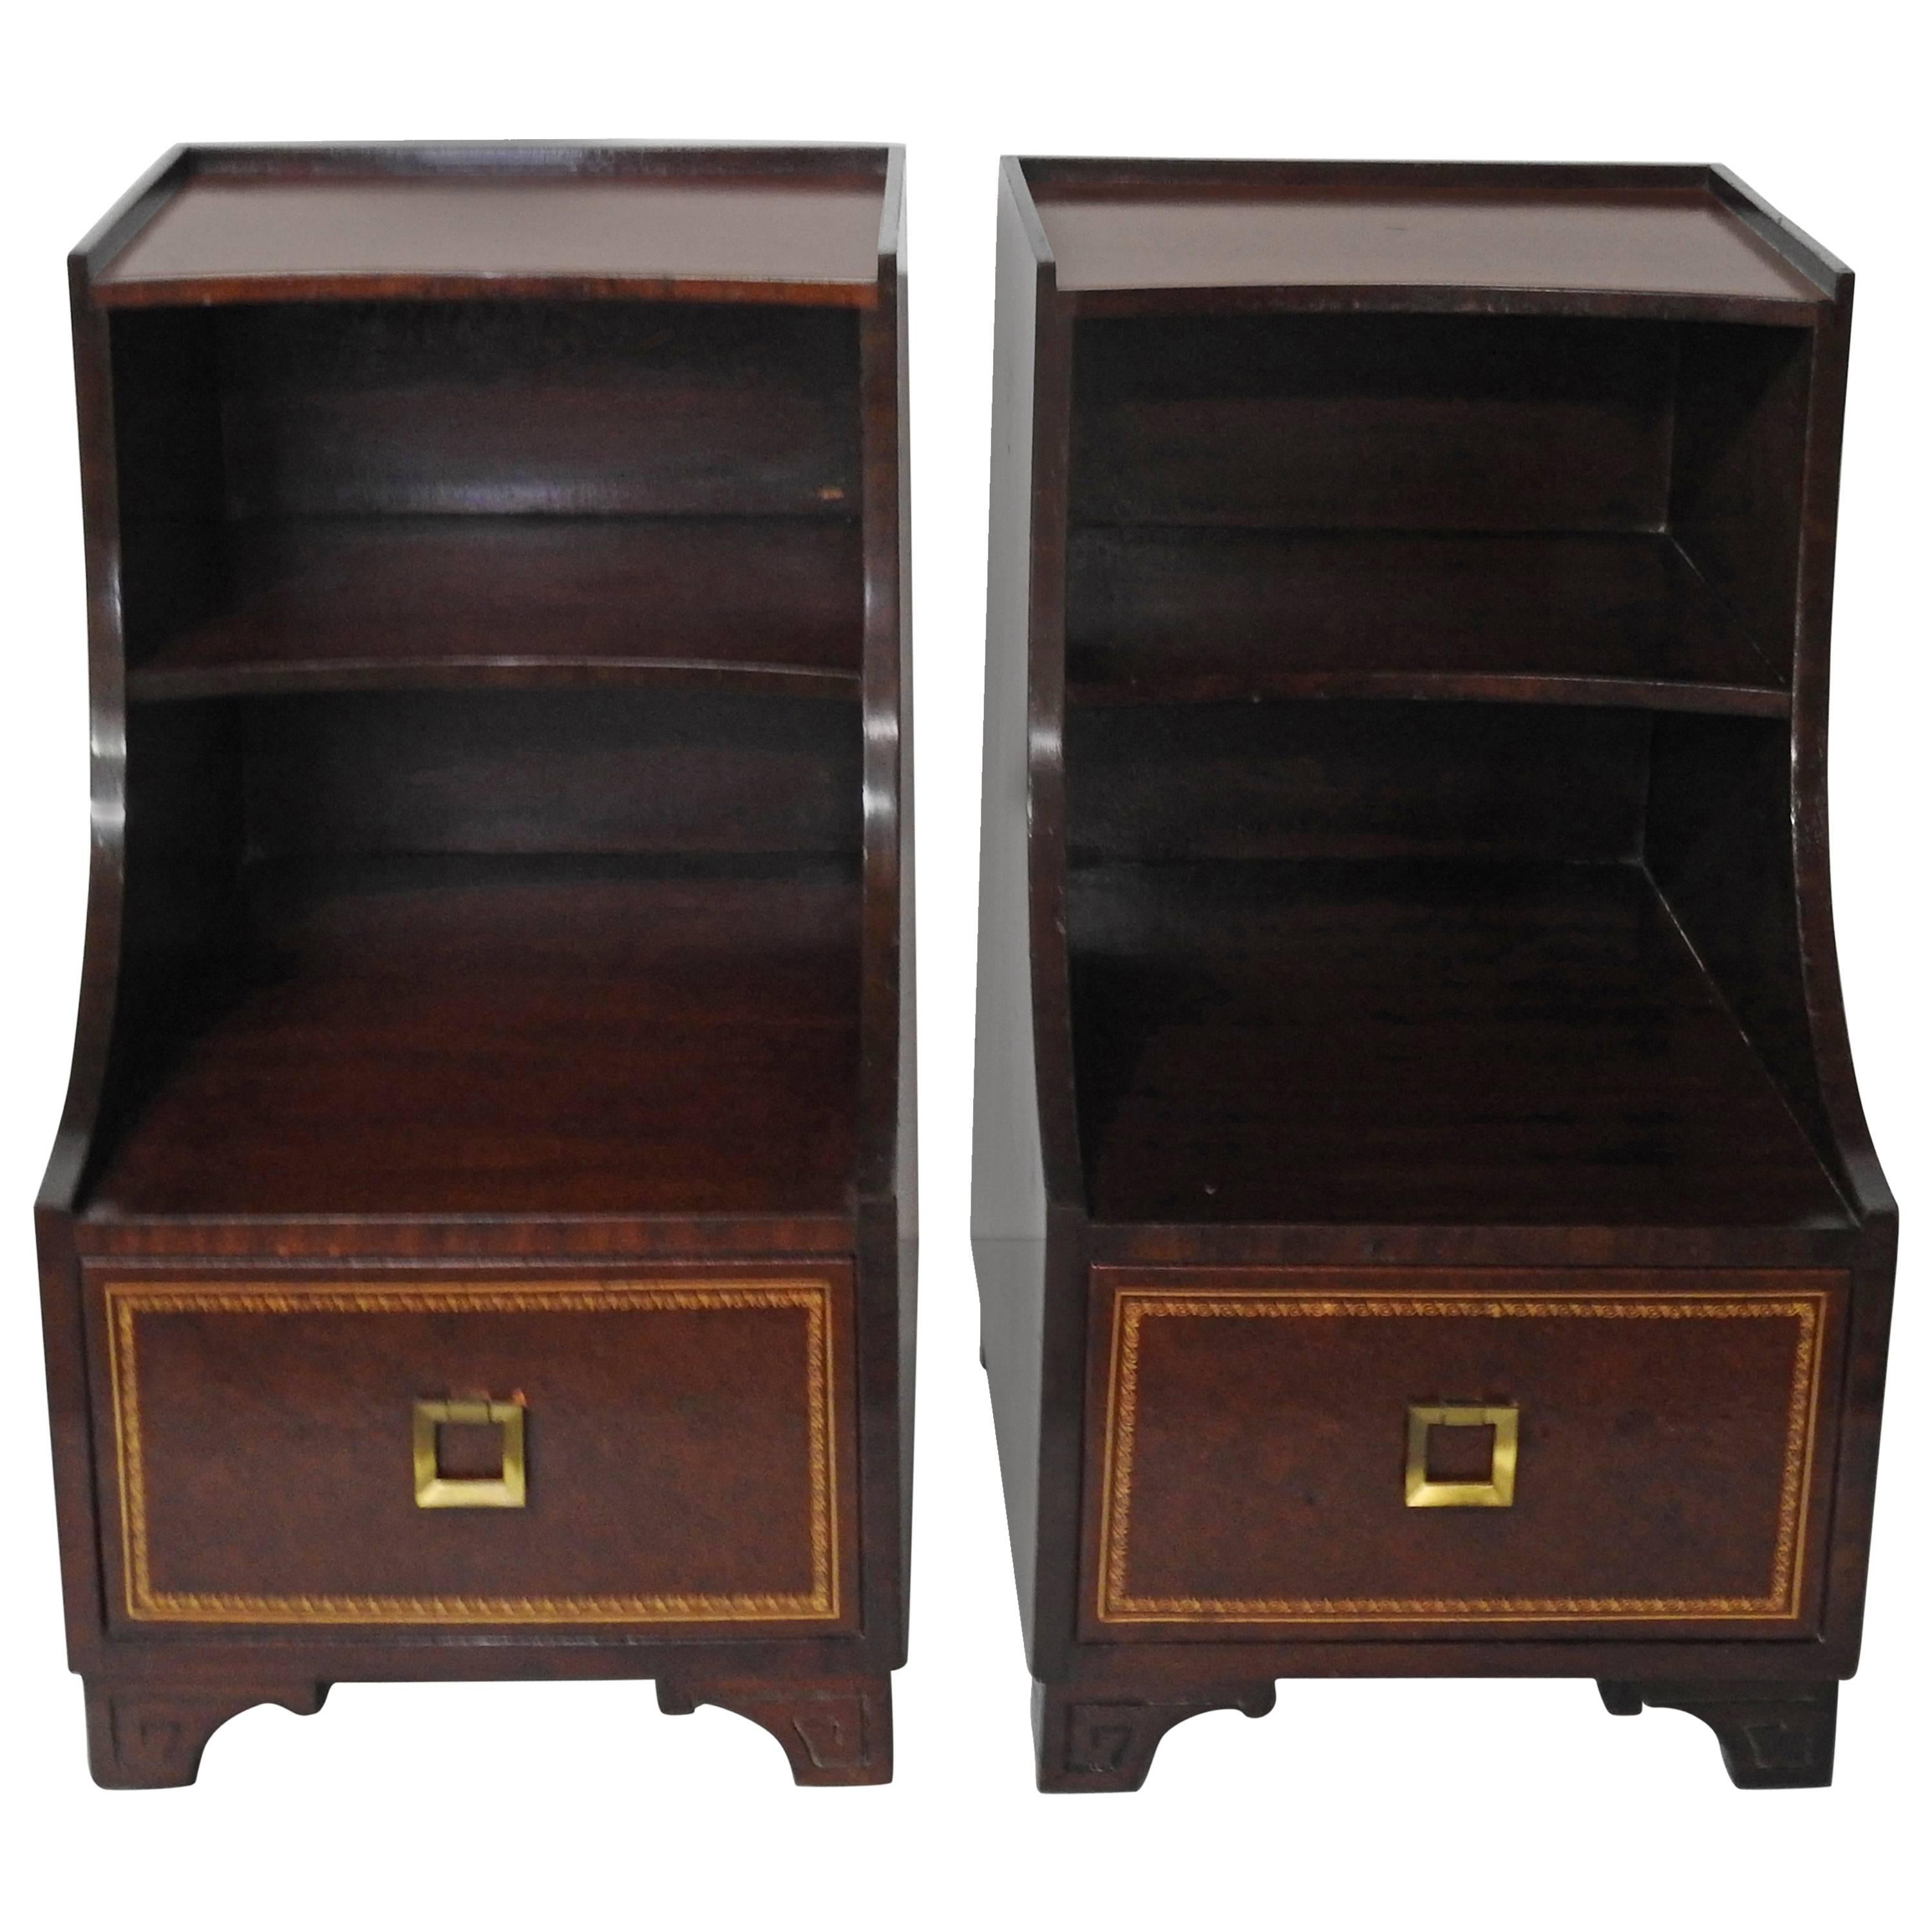 Pair of Classic Asian Modern Design Step End Tables in the Manner of James Mont For Sale